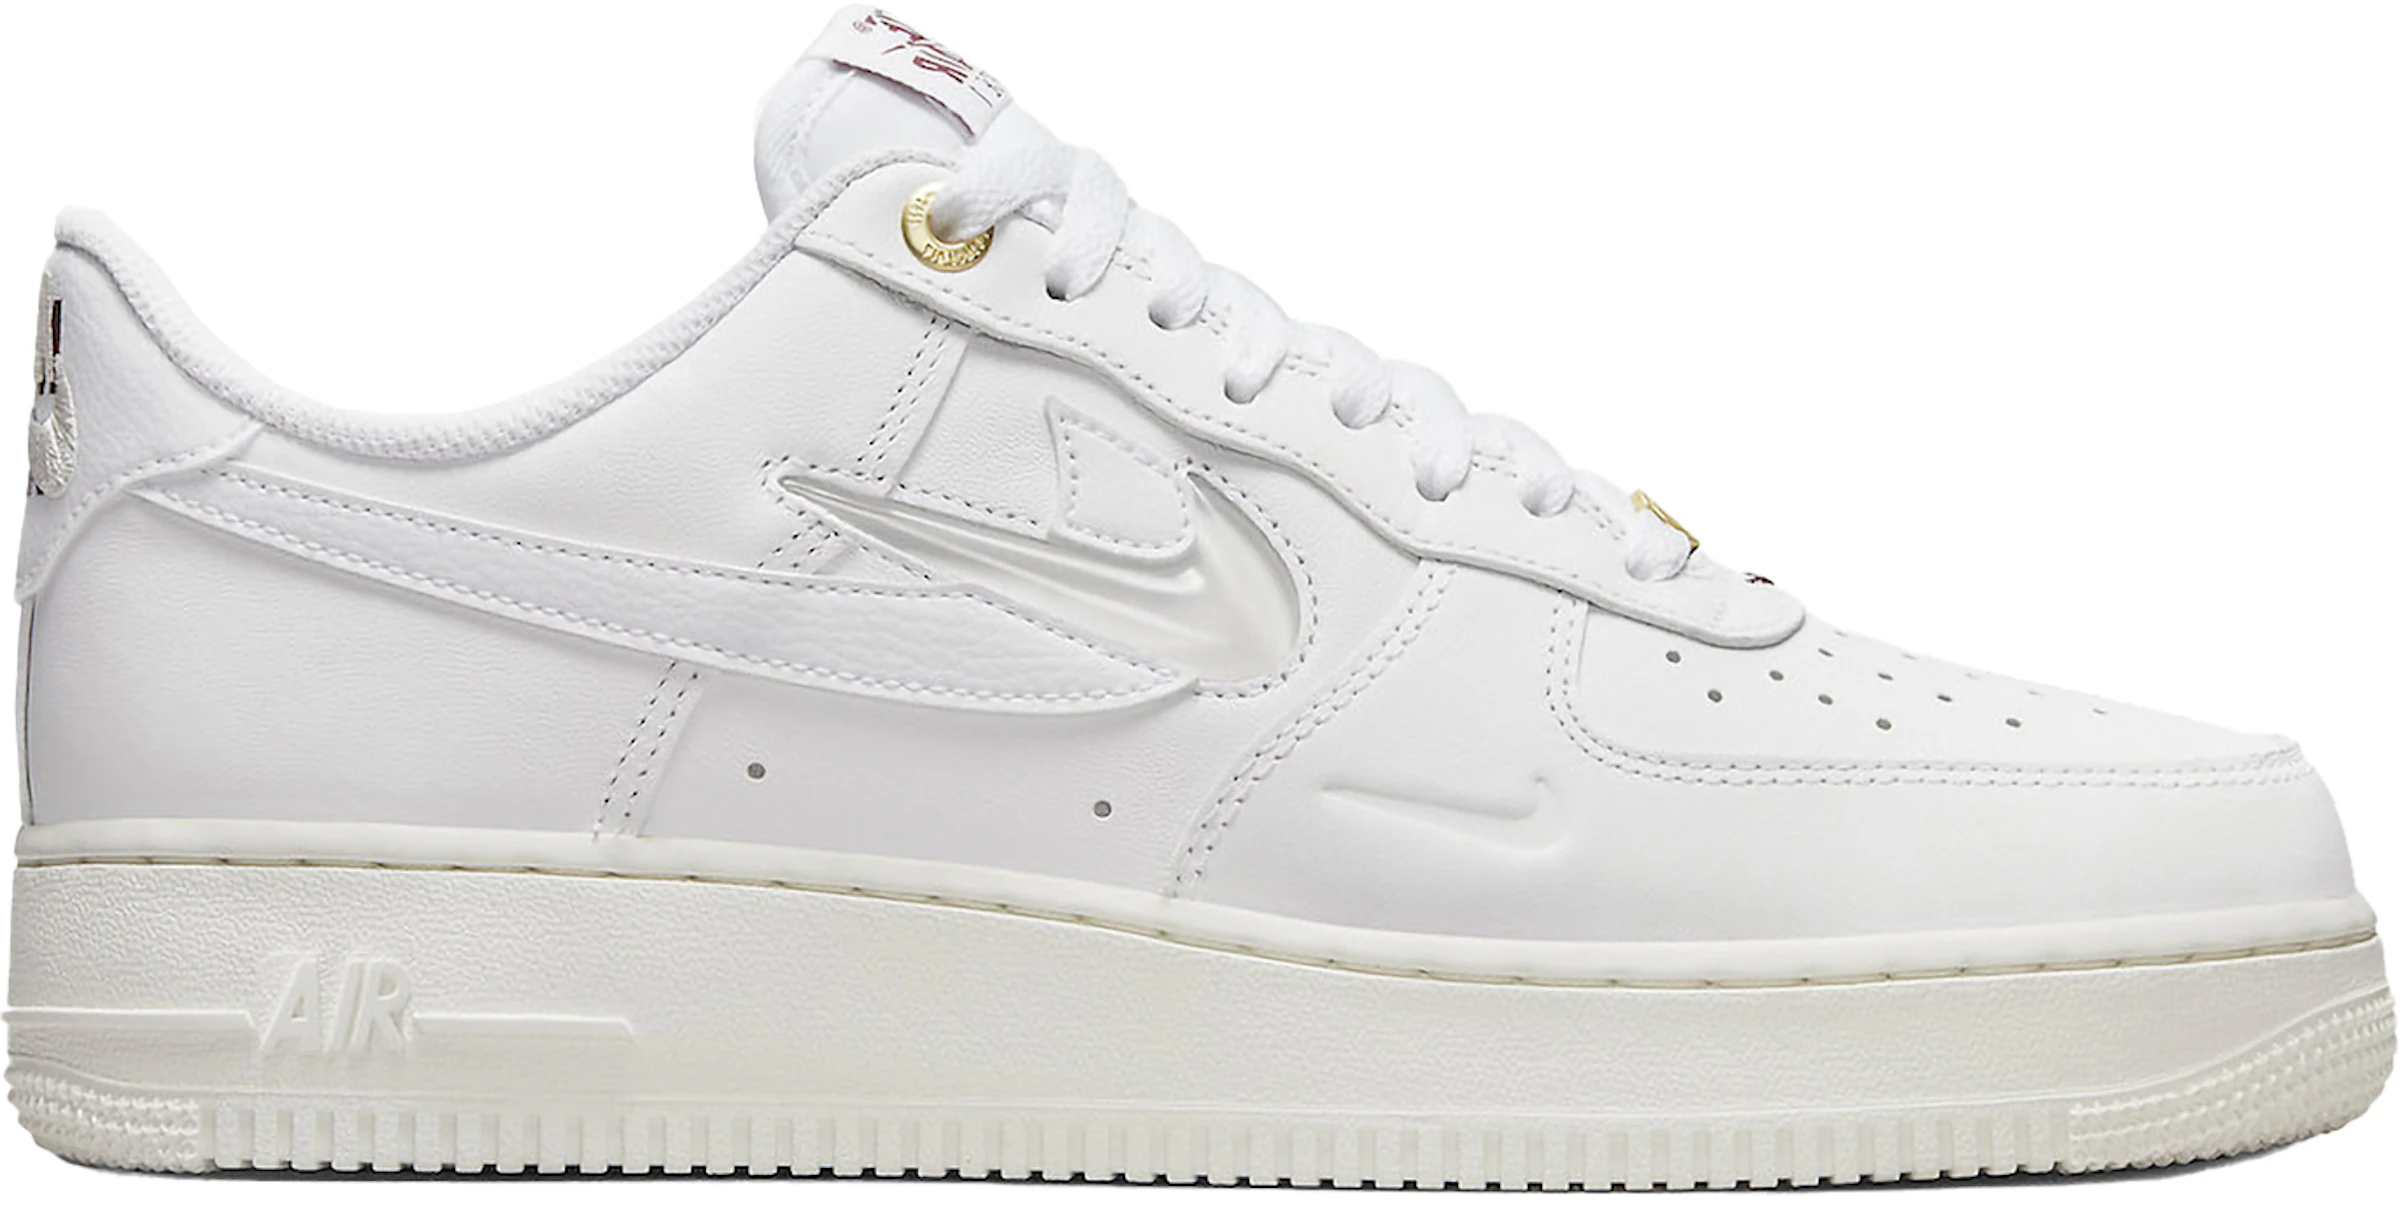 Kakadu veneno empleo Nike Air Force 1 Low '07 LV8 Join Forces Sail - DQ7664-100 - ES